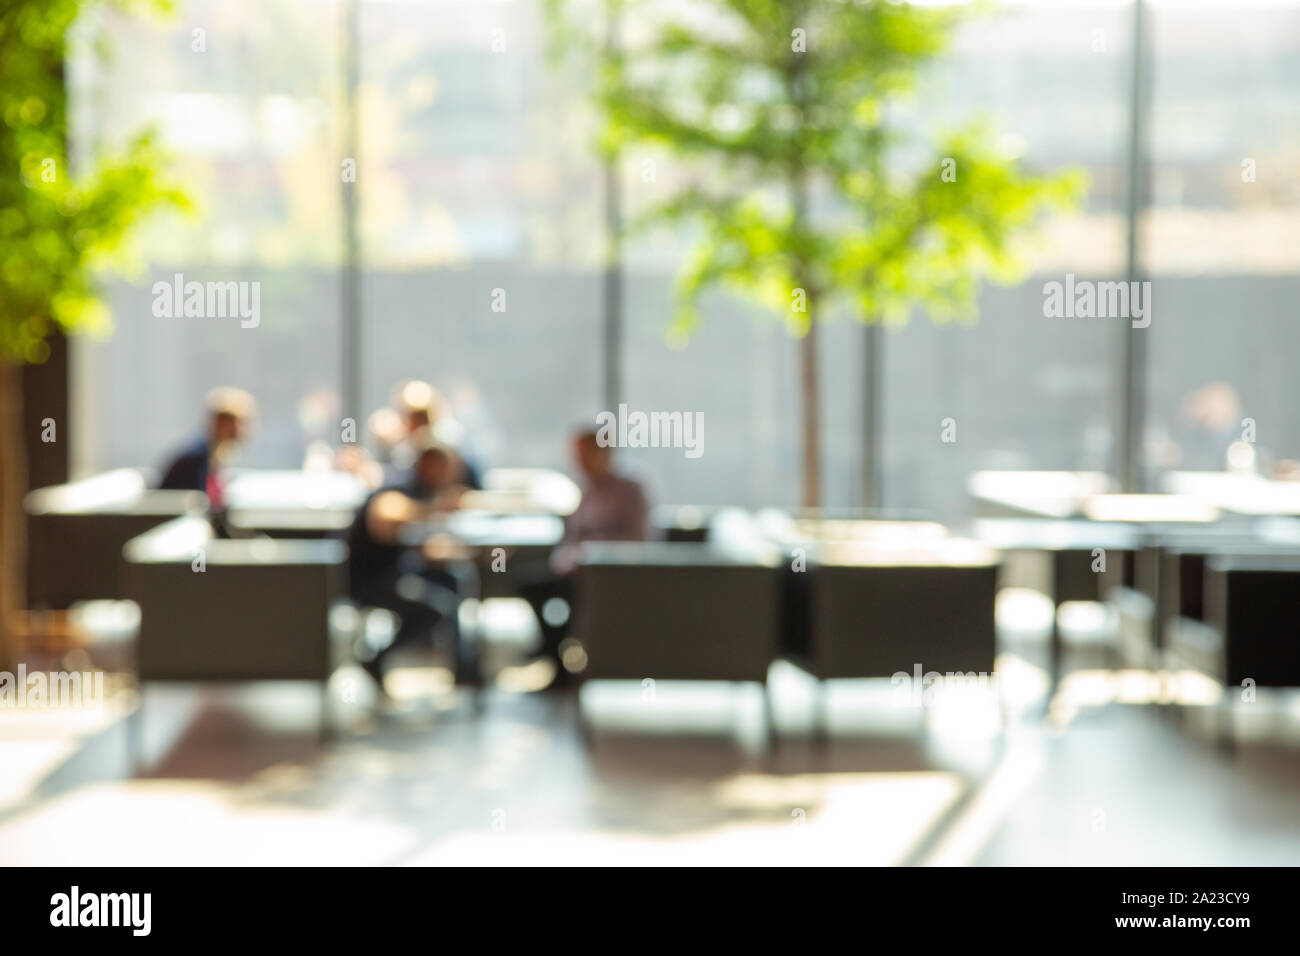 Blur image of open space for negotiations and relaxation with big window. Waiting place. Business concept. Stock Photo